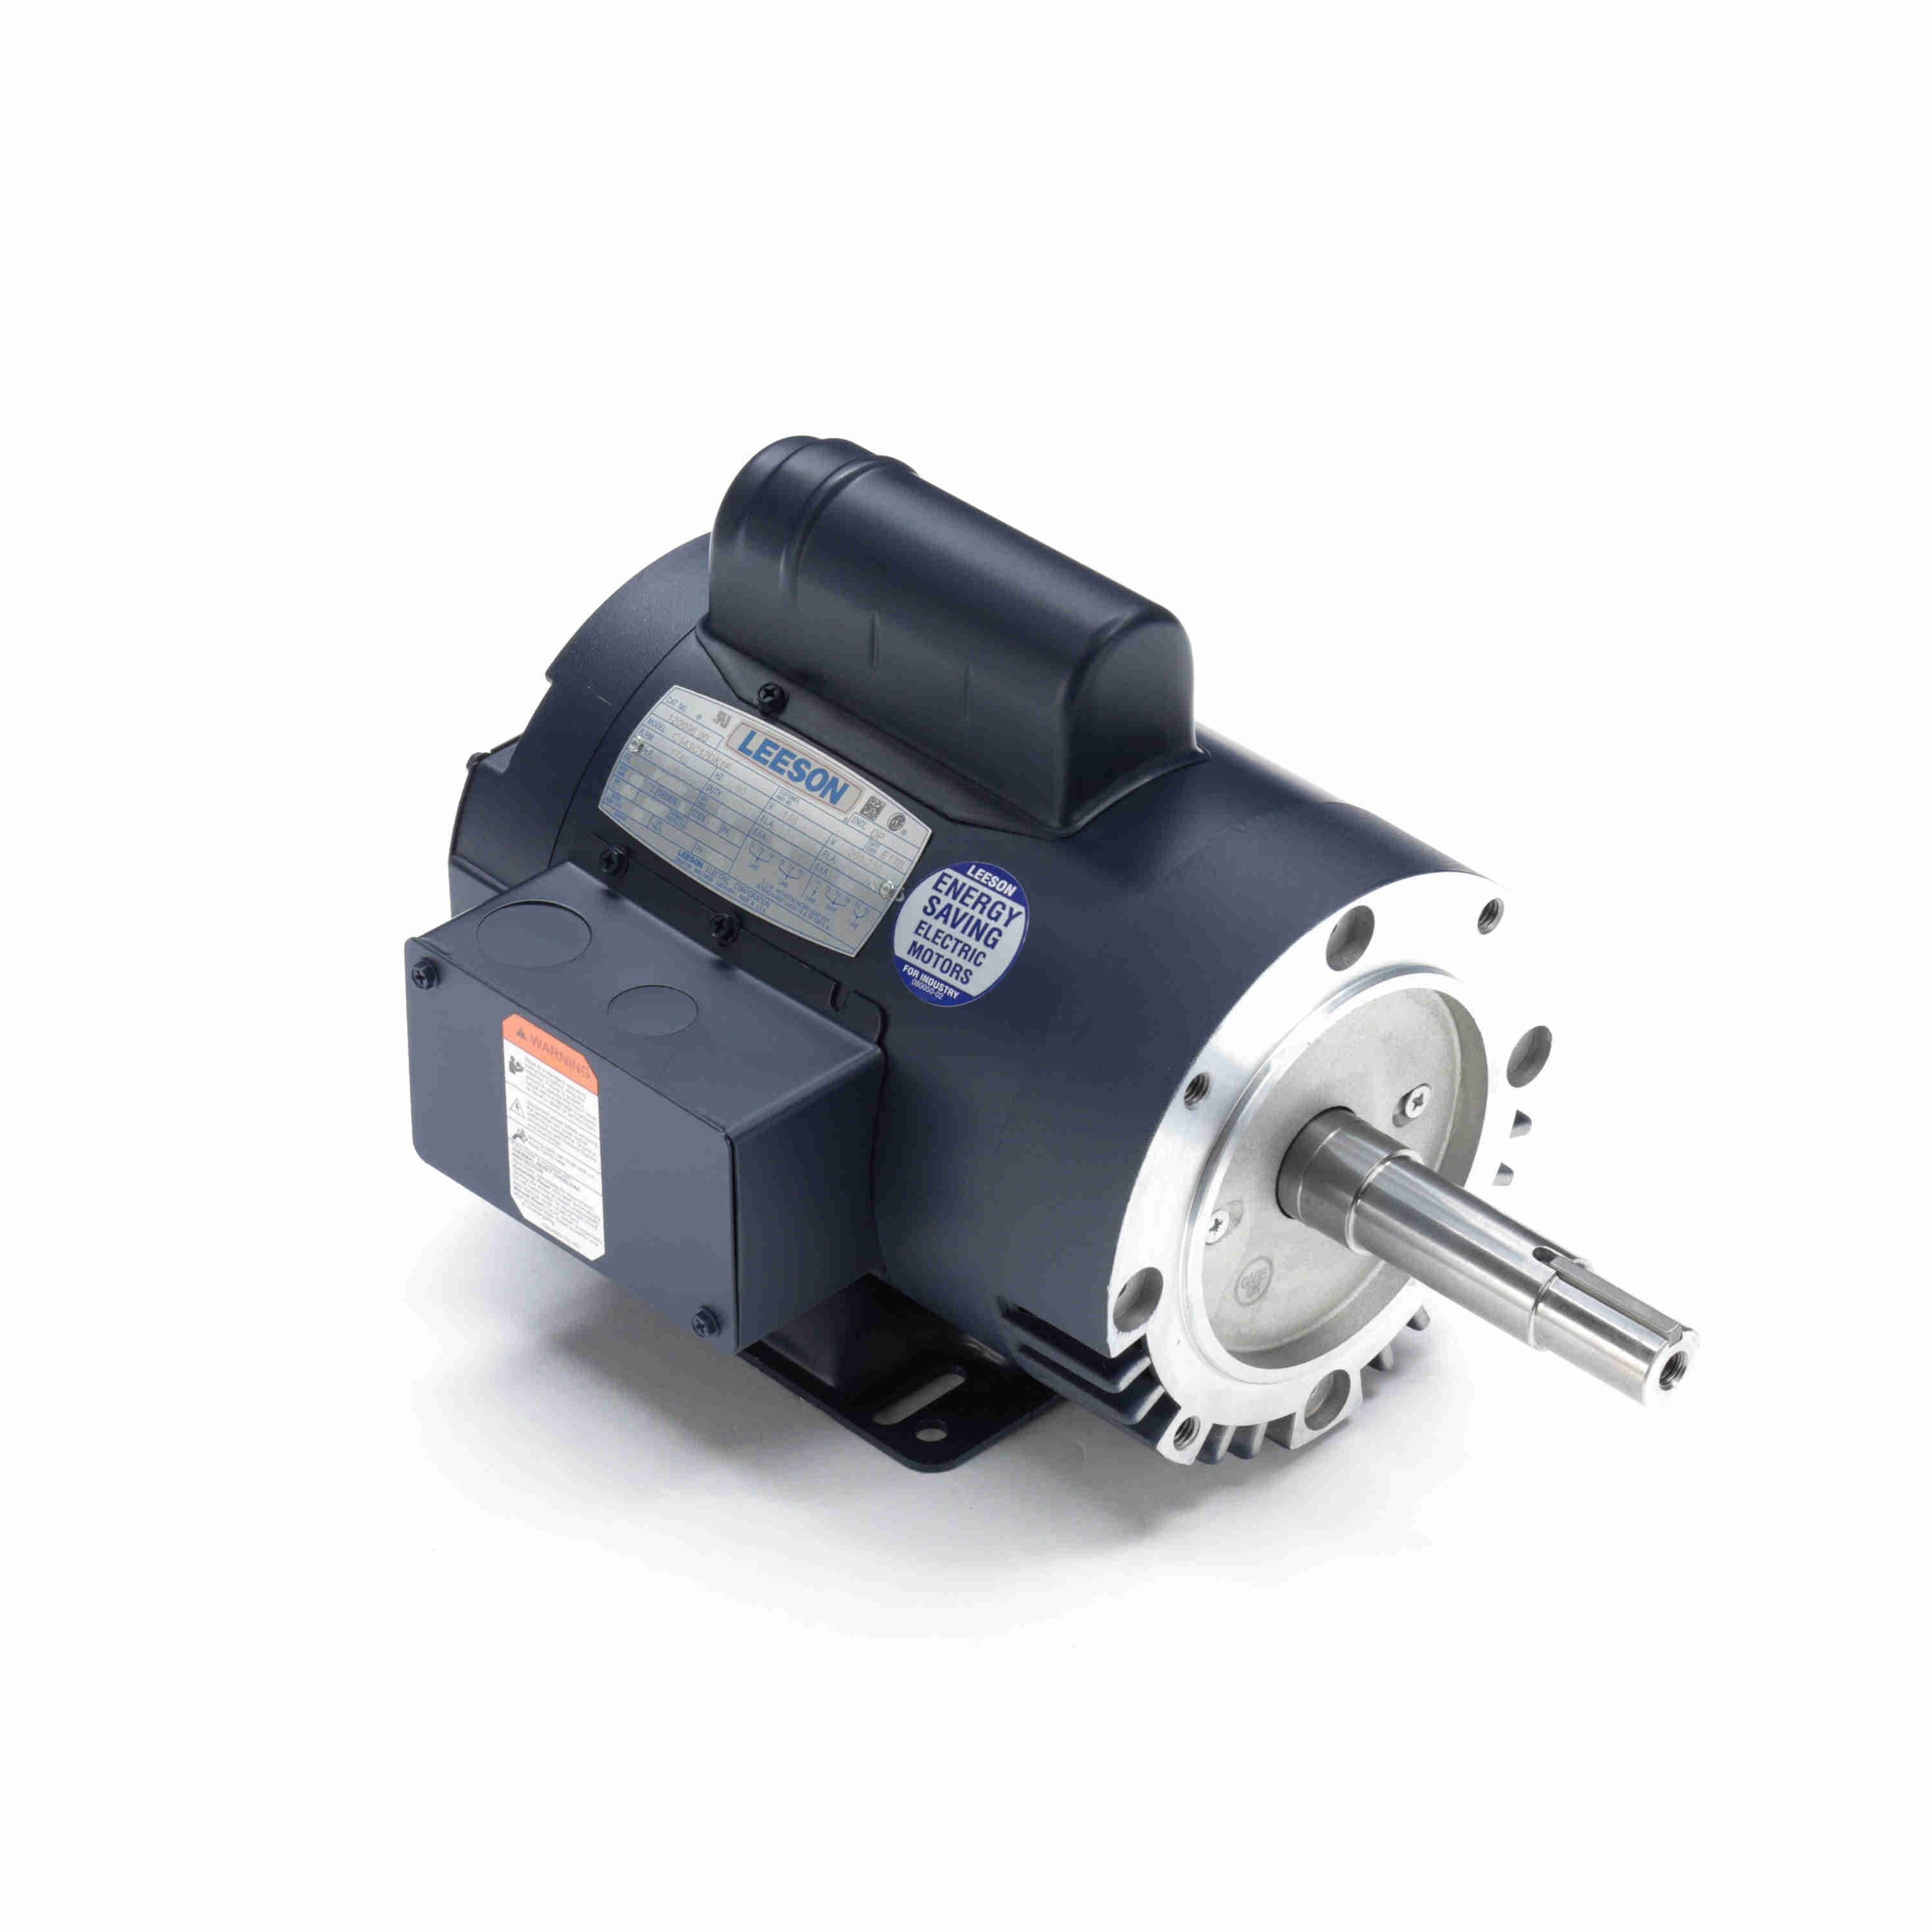 Leeson/Lincoln 120996.00 Close Coupled Pump Motor